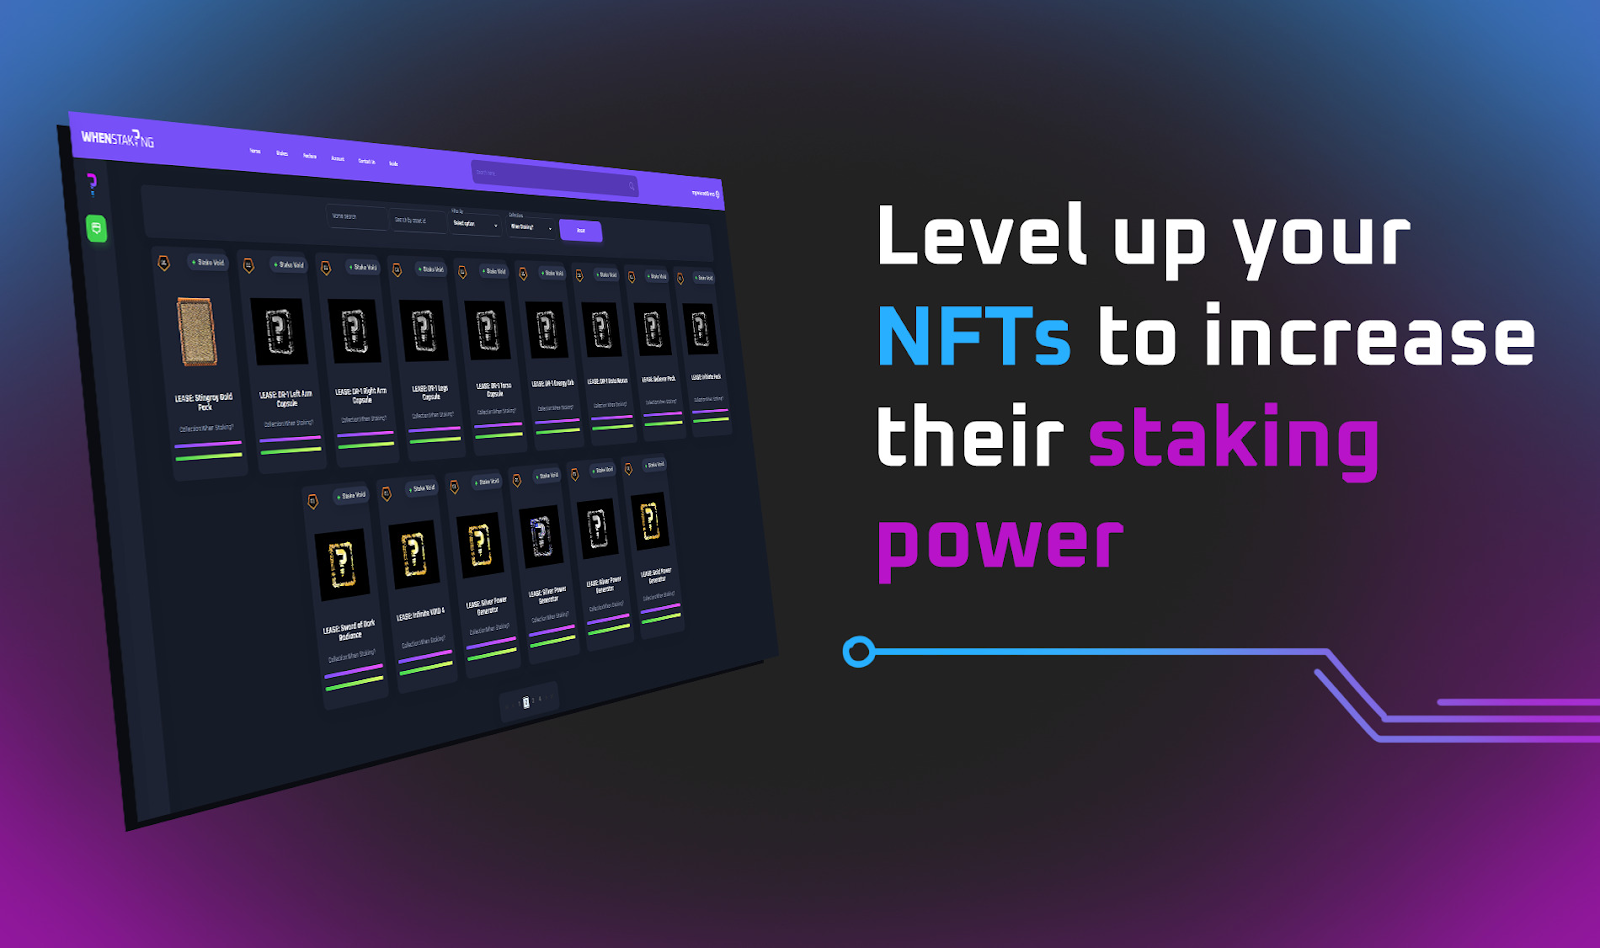 An image of WhenStaking’s NFT staking platform.